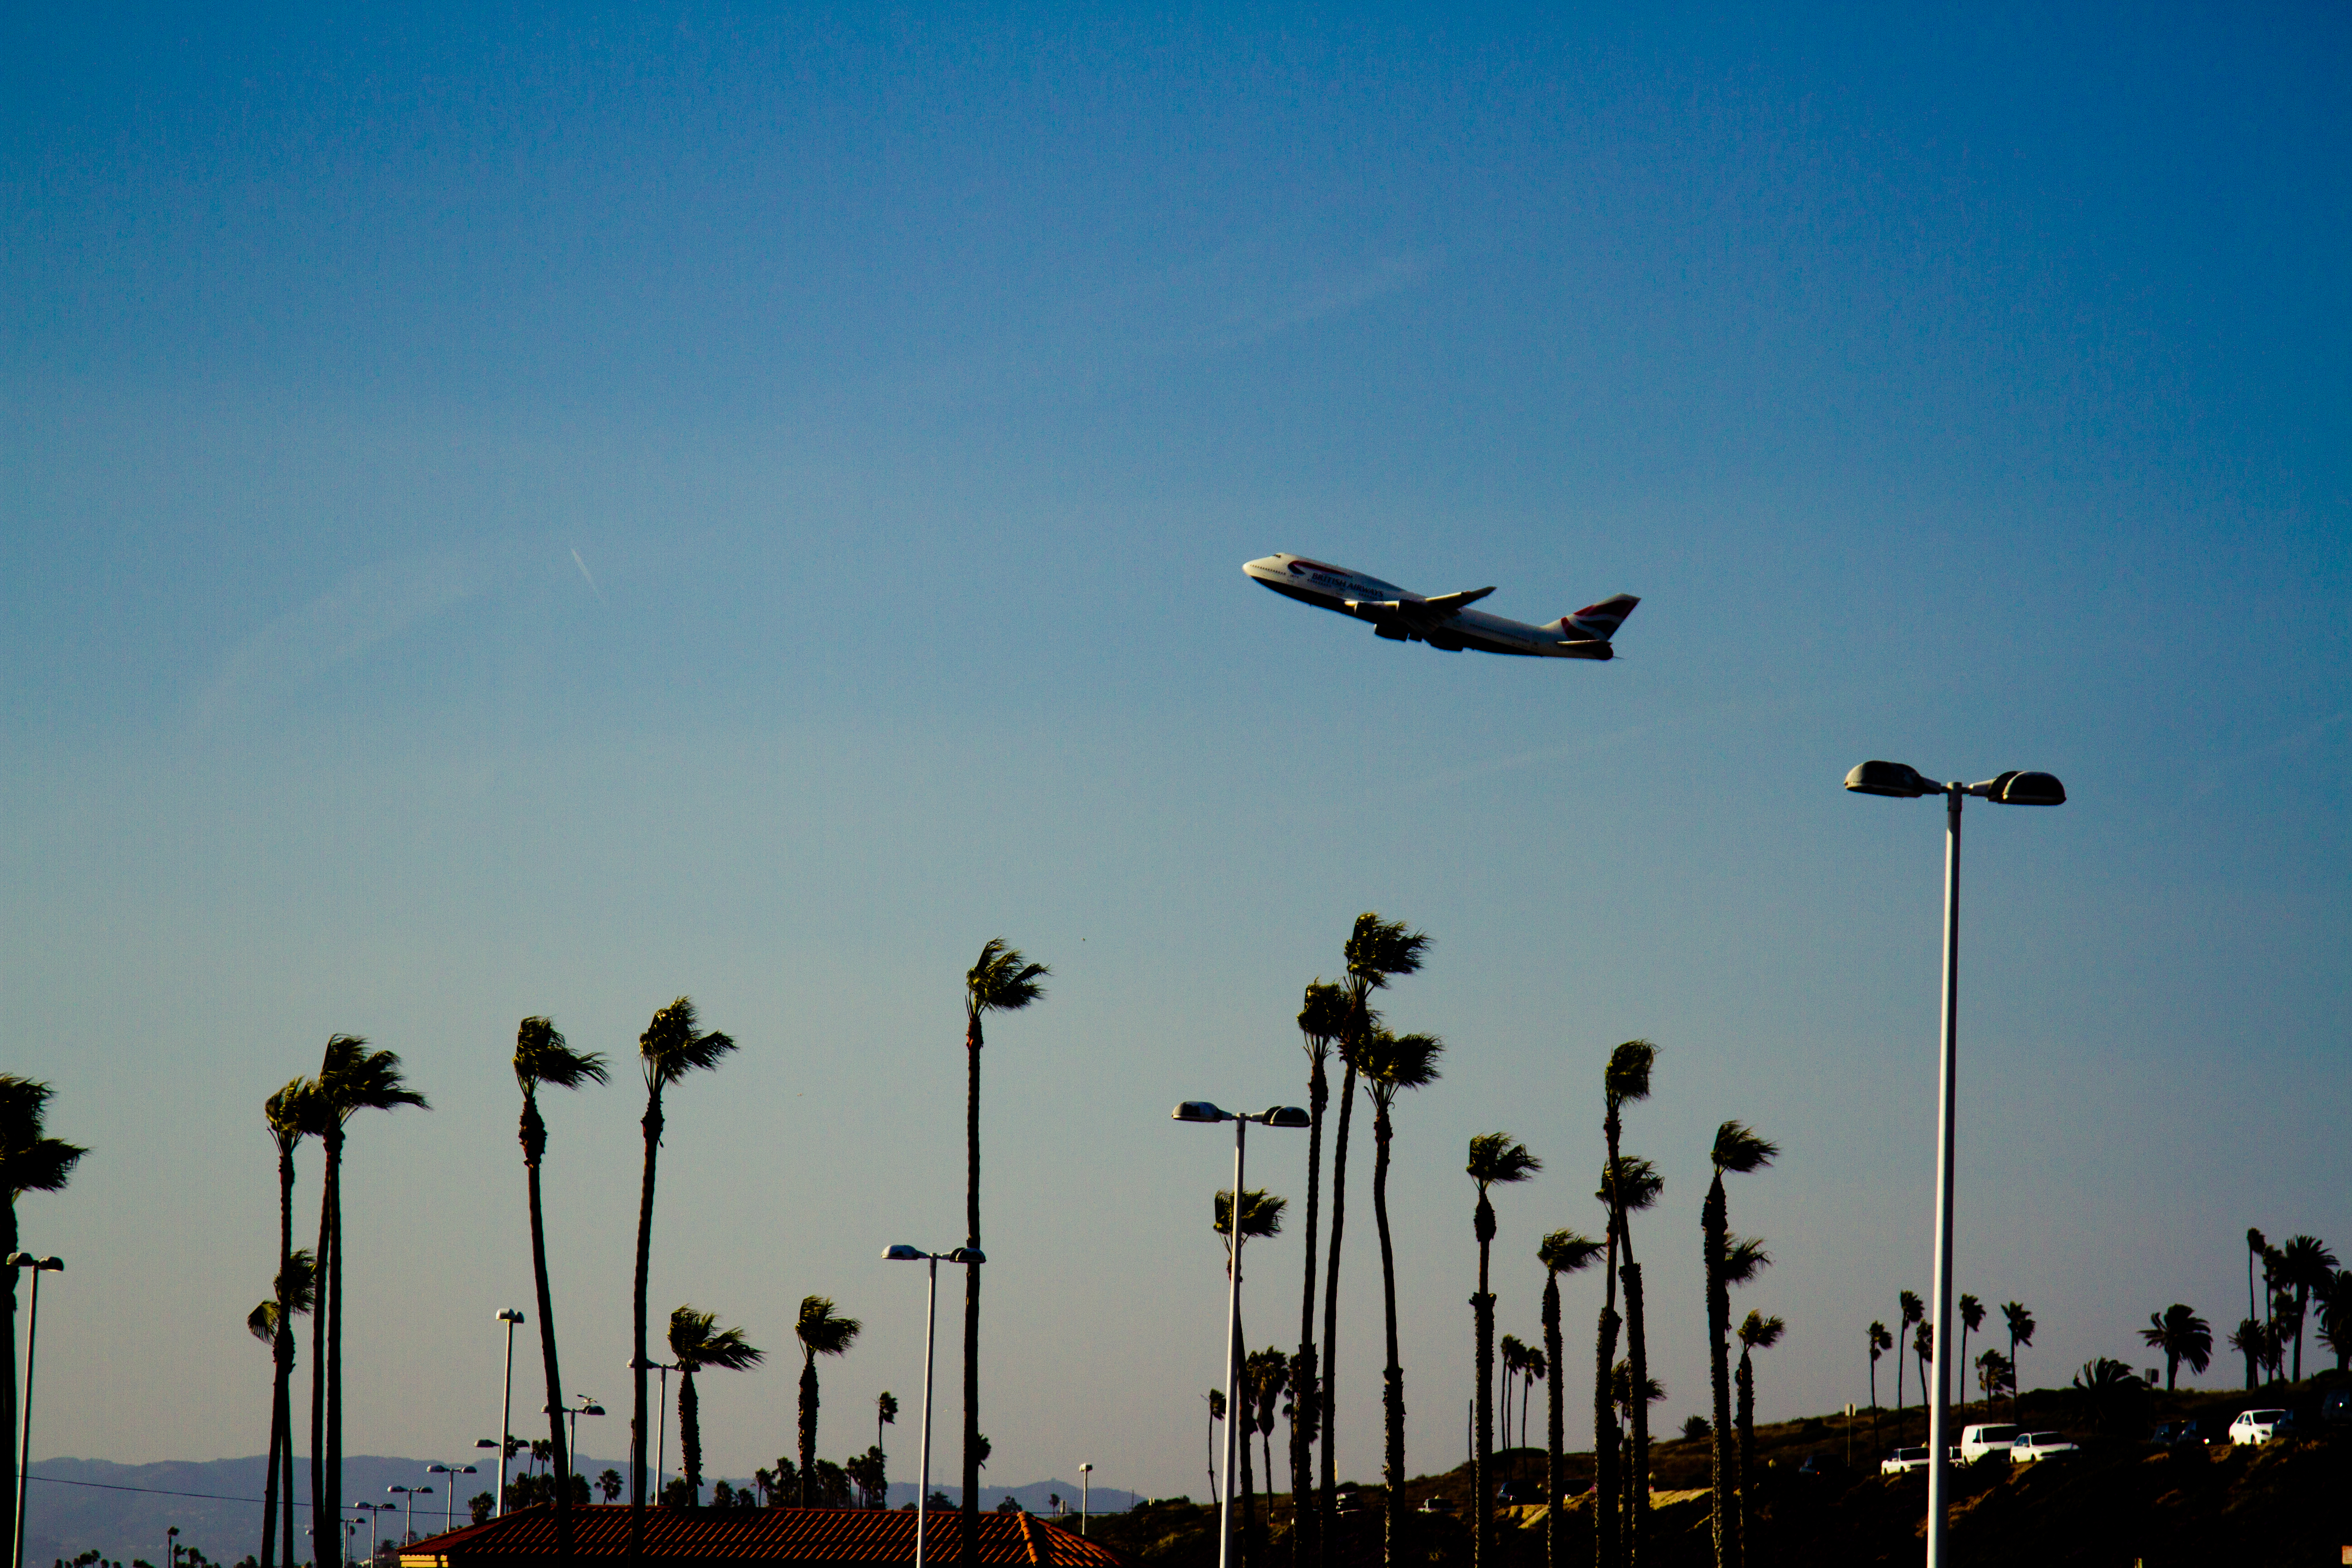 photo of plane taking off with palm tress in the background